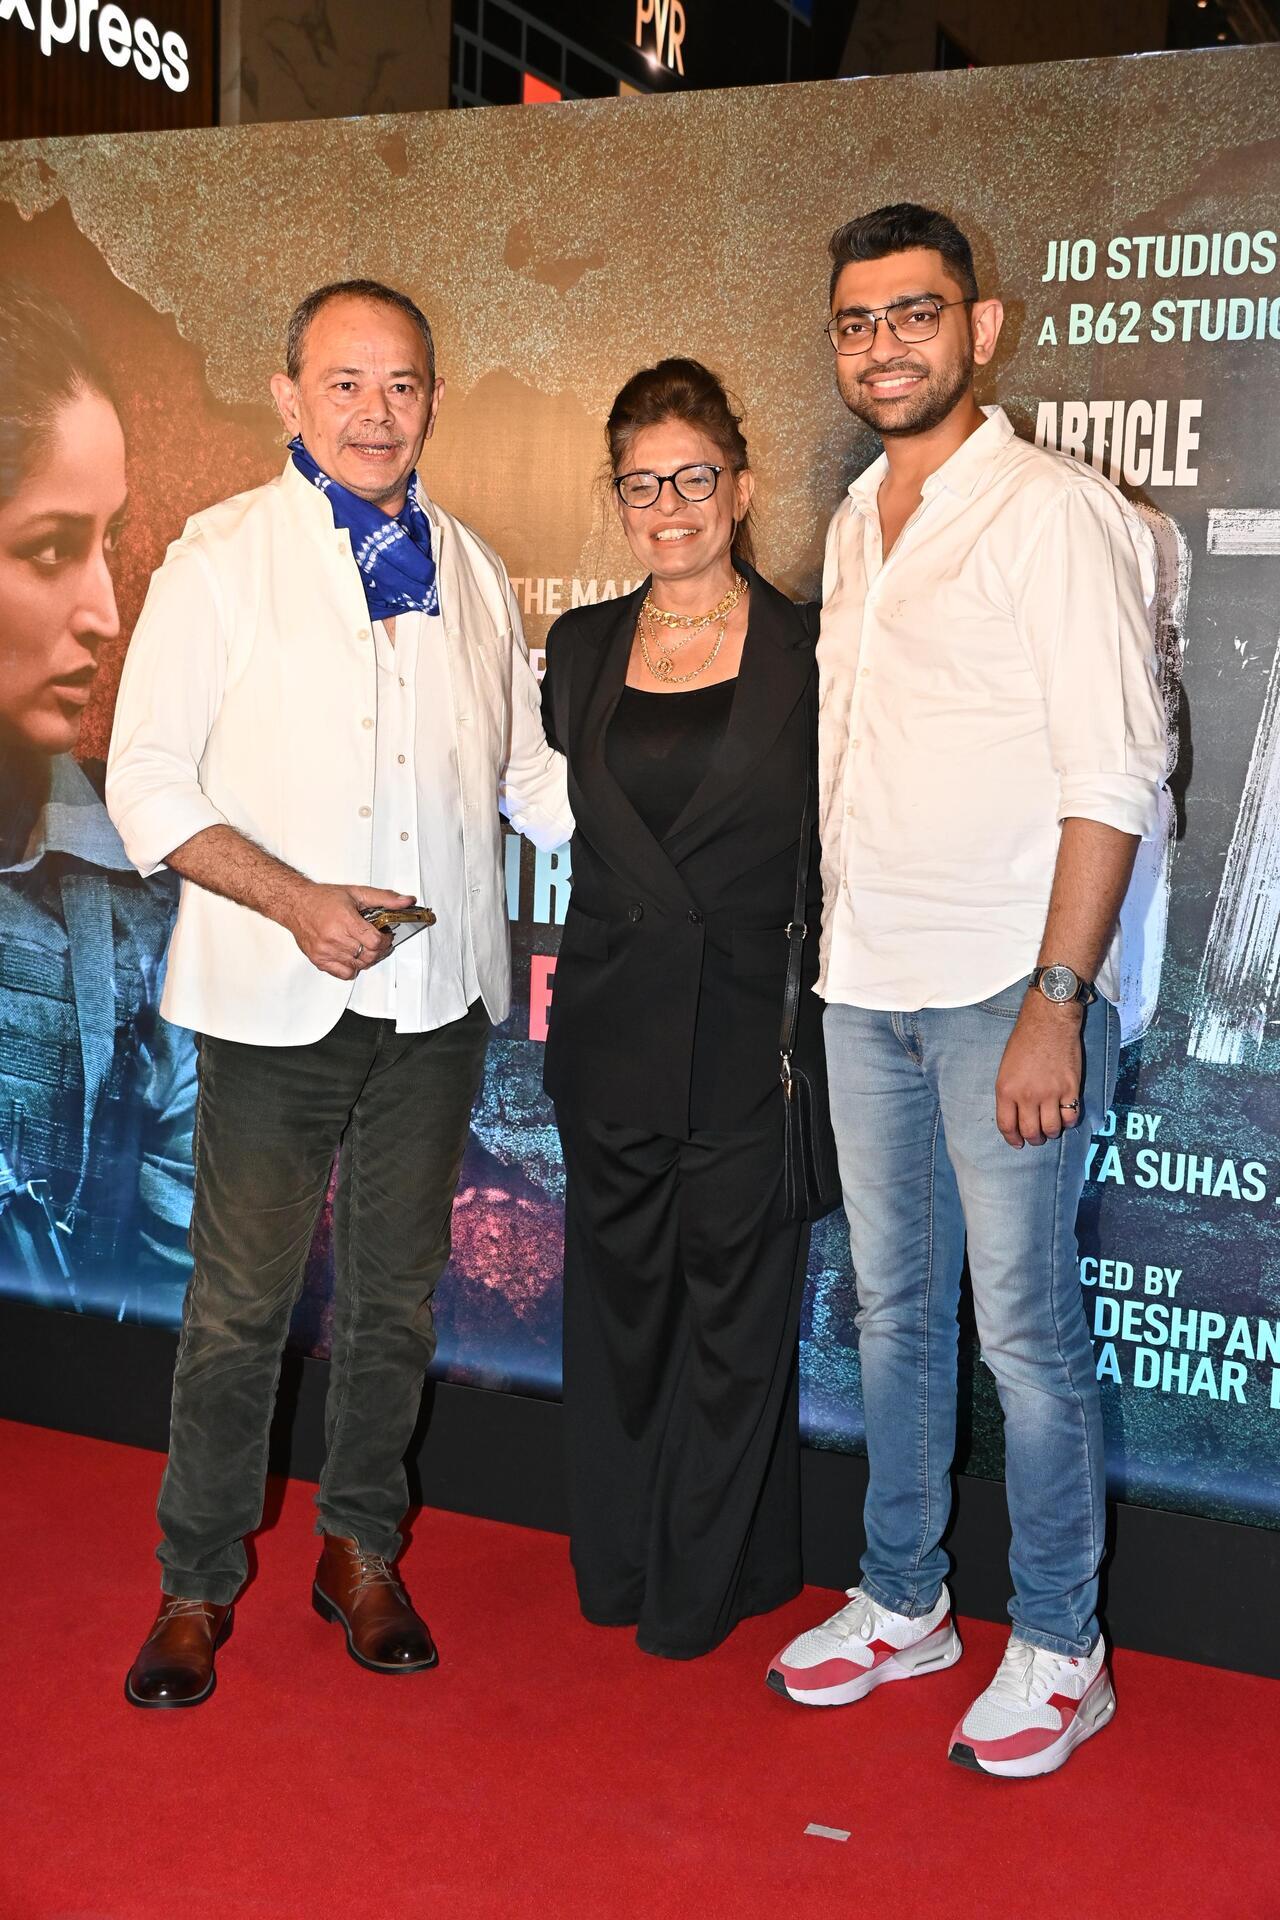 Rajendranath Zutshi who plays a pivotal role in the film strikes a pose with his family